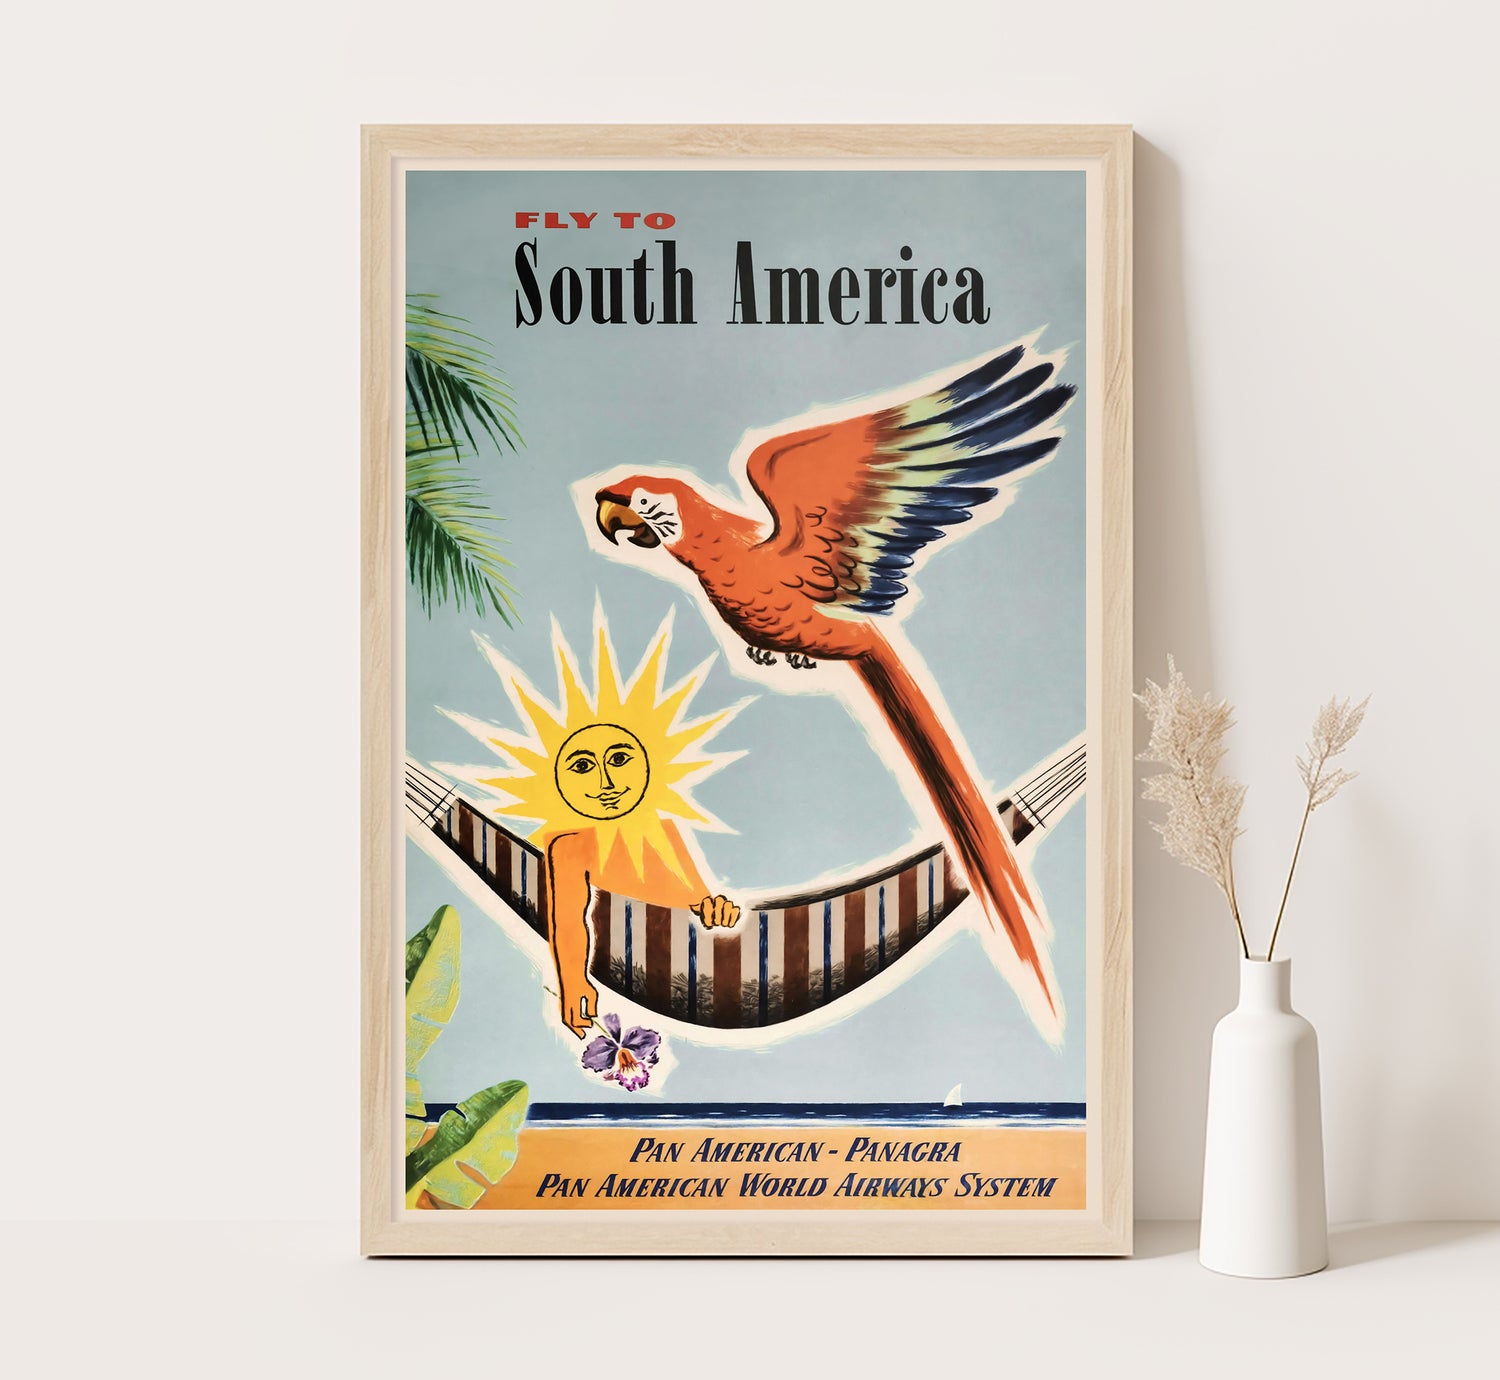 South America travel posters